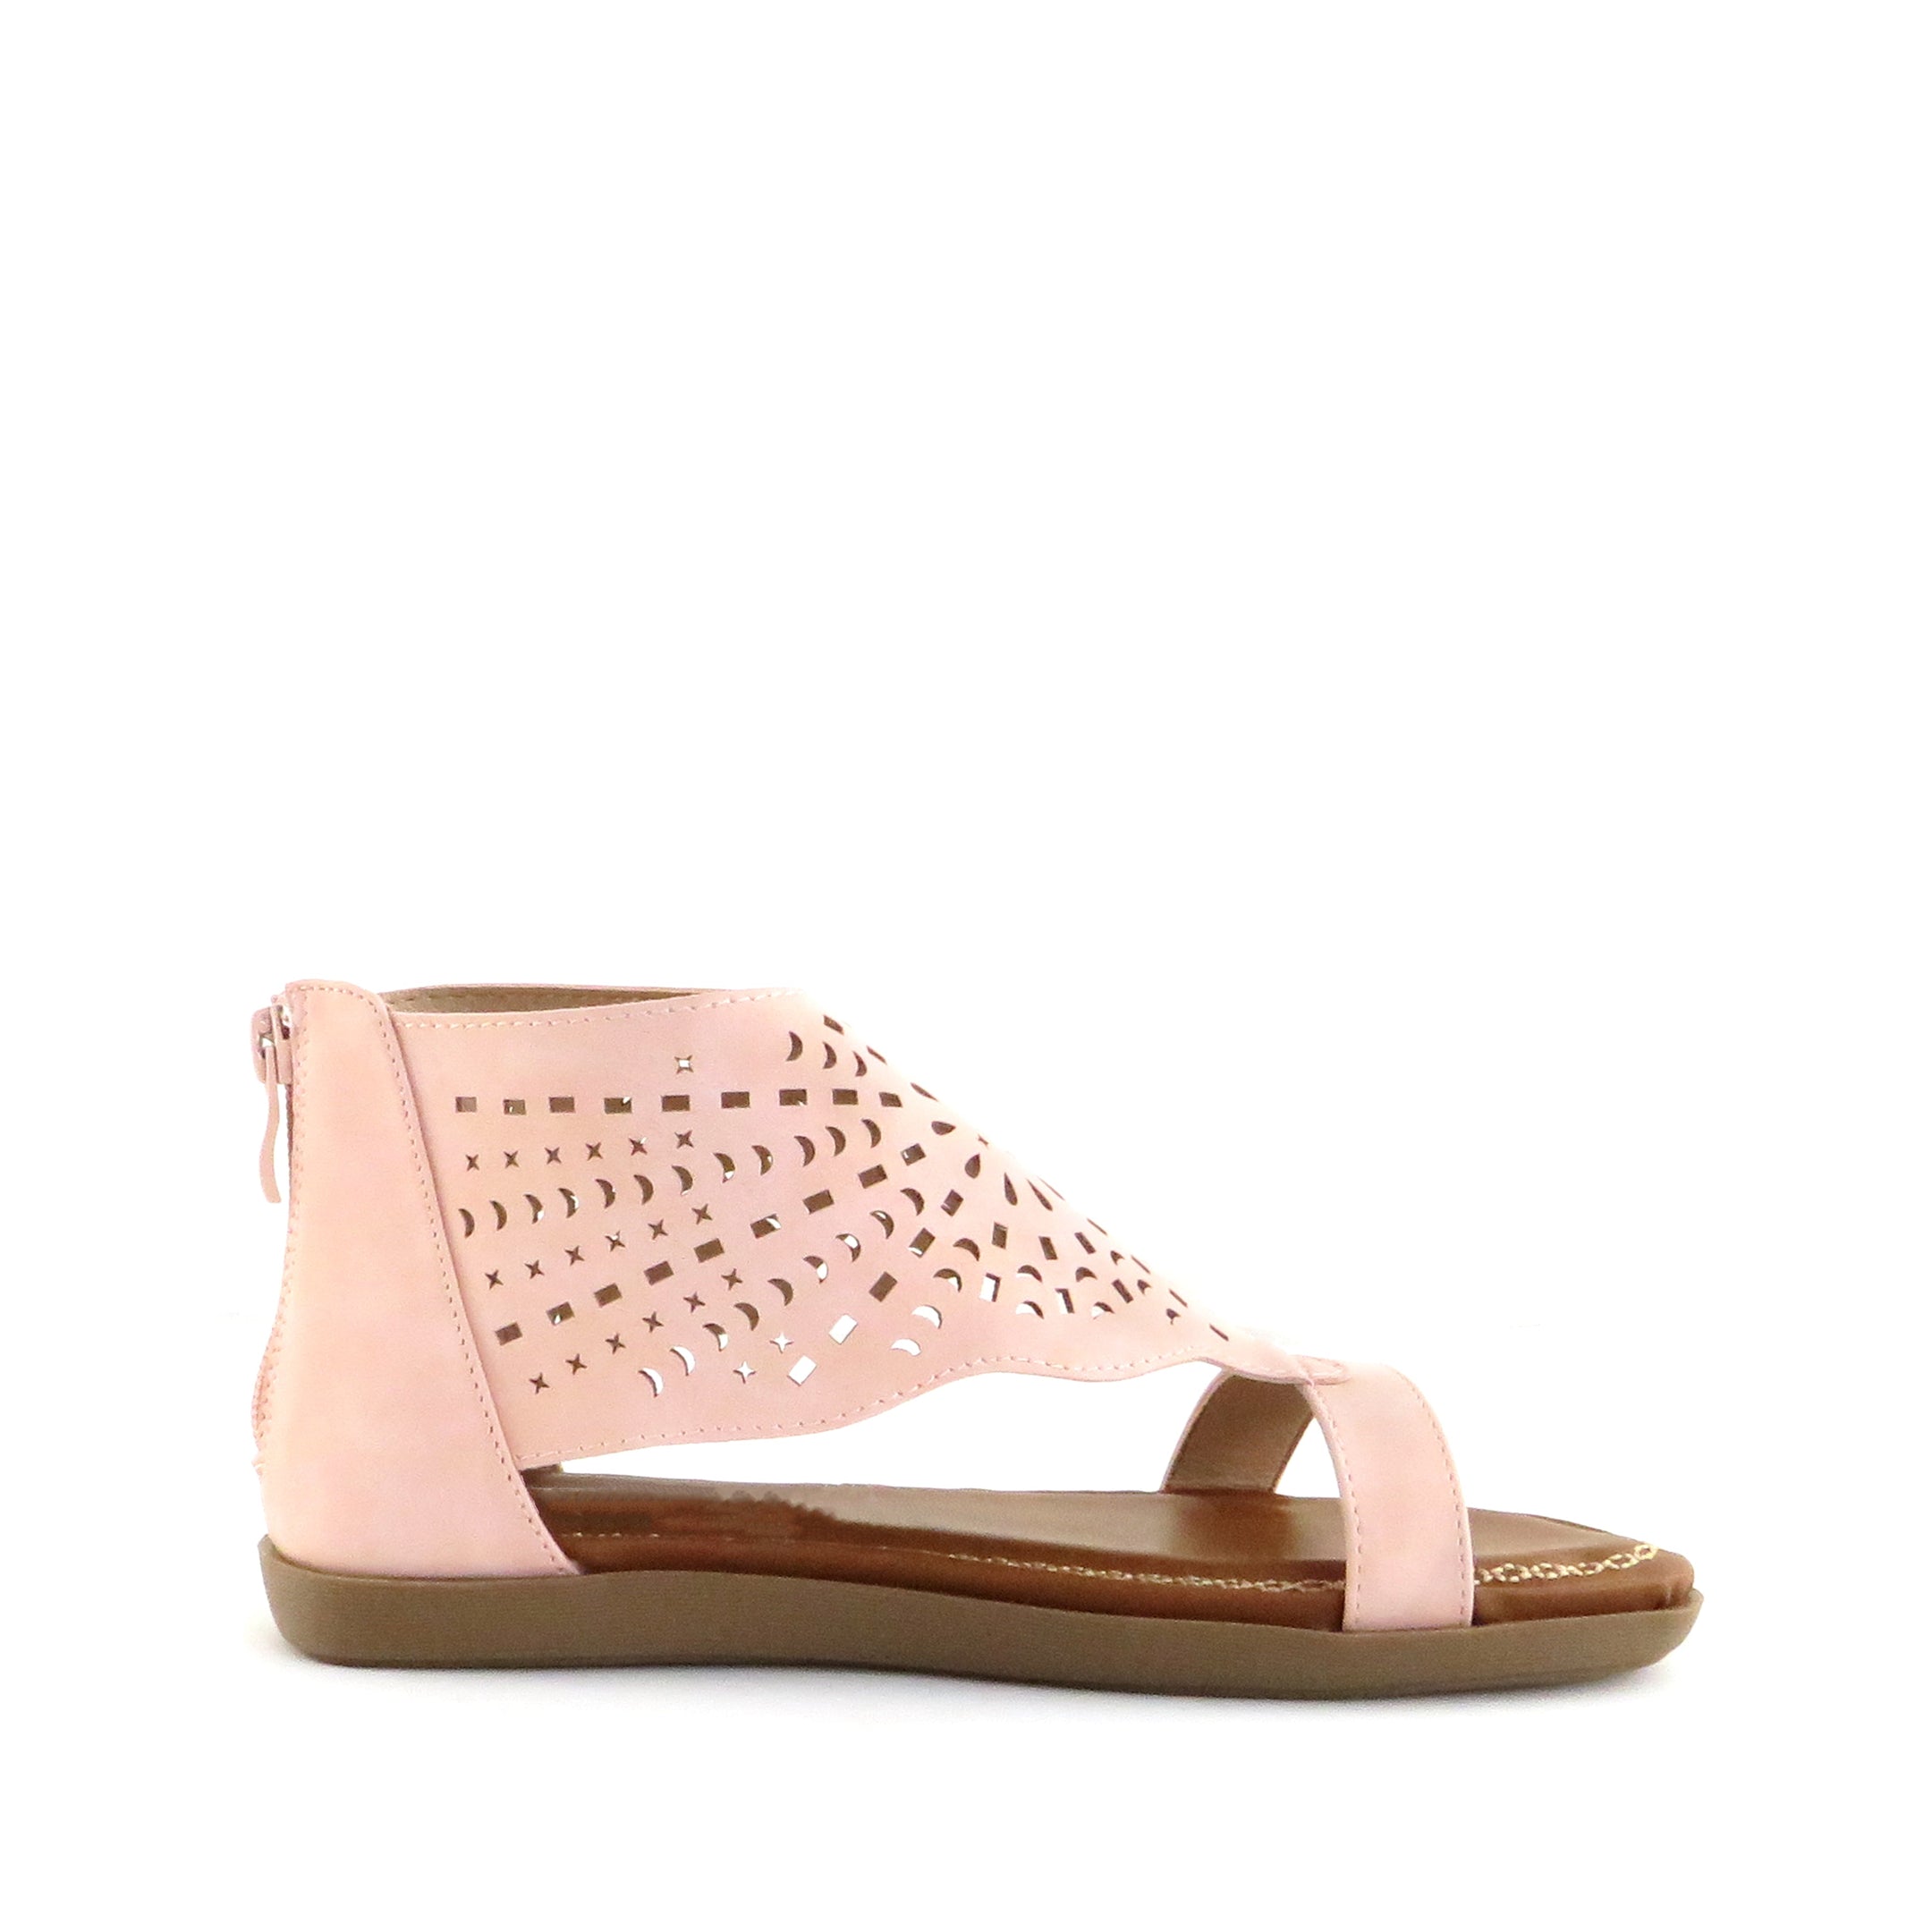 Buy Women's Crissy Peach Perforated Sandal by Nest Shoes